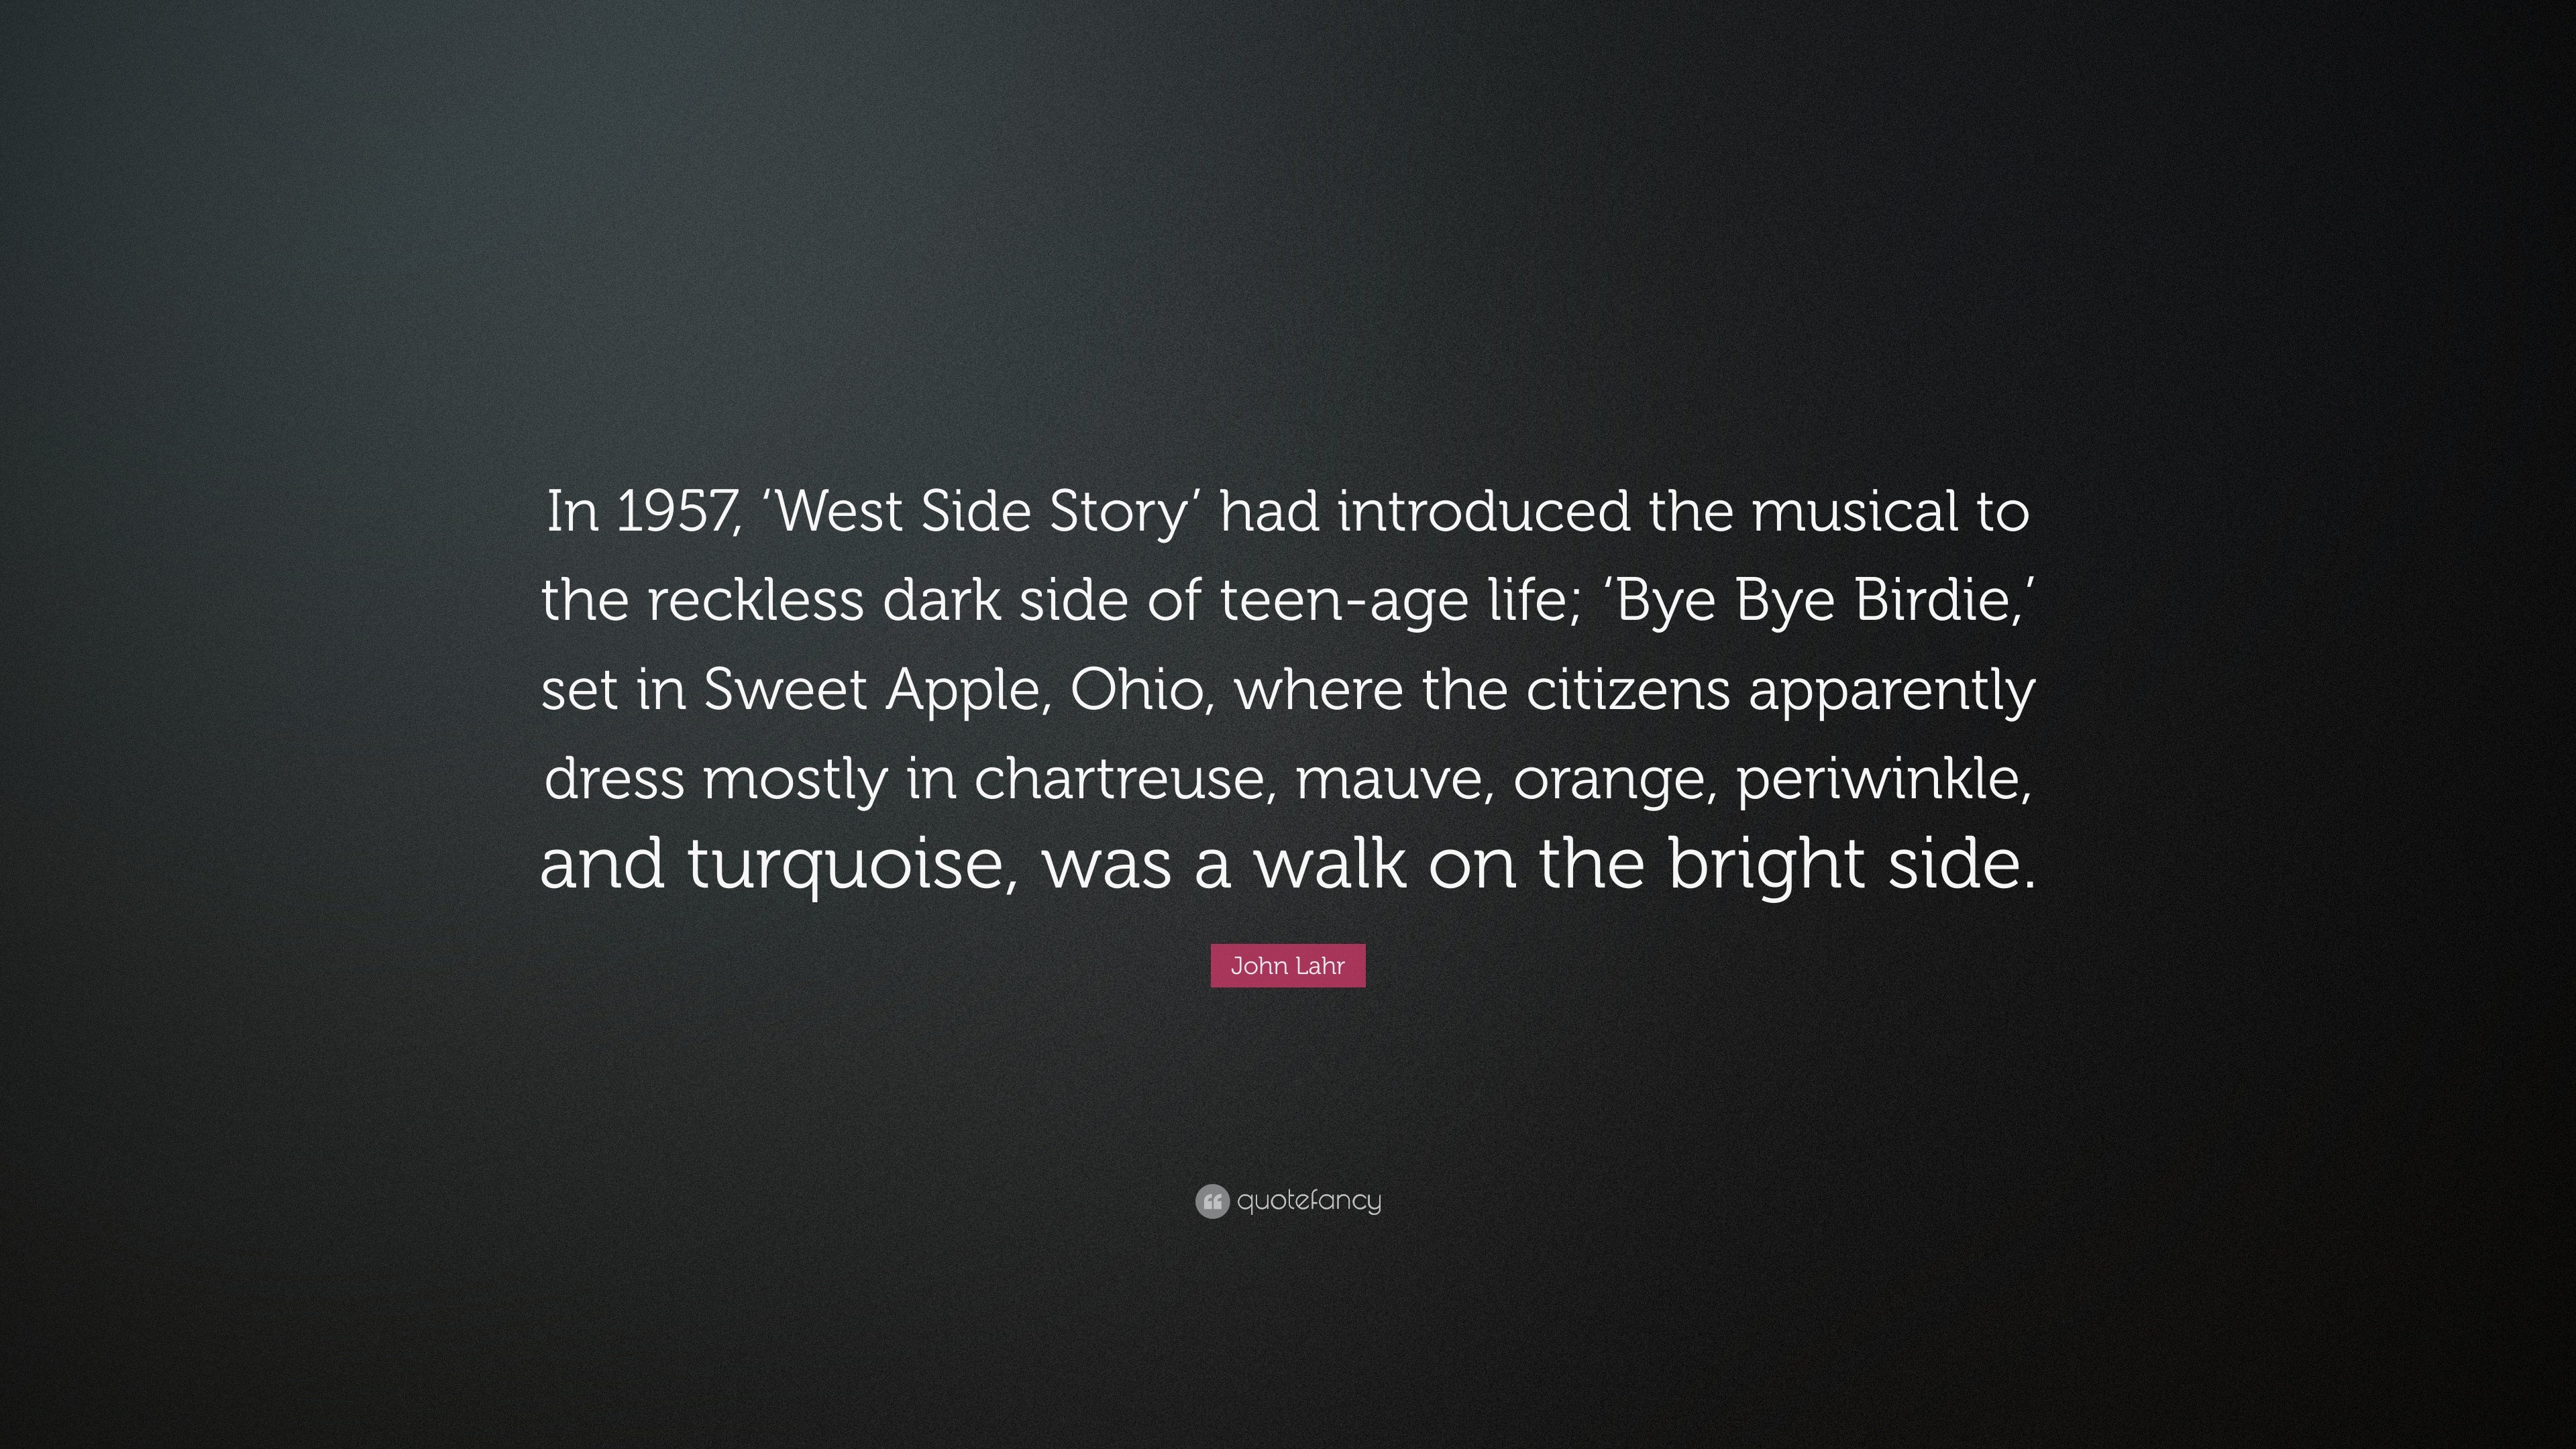 3840x2160 John Lahr Quote: “In 1957, 'West Side Story' had introduced the